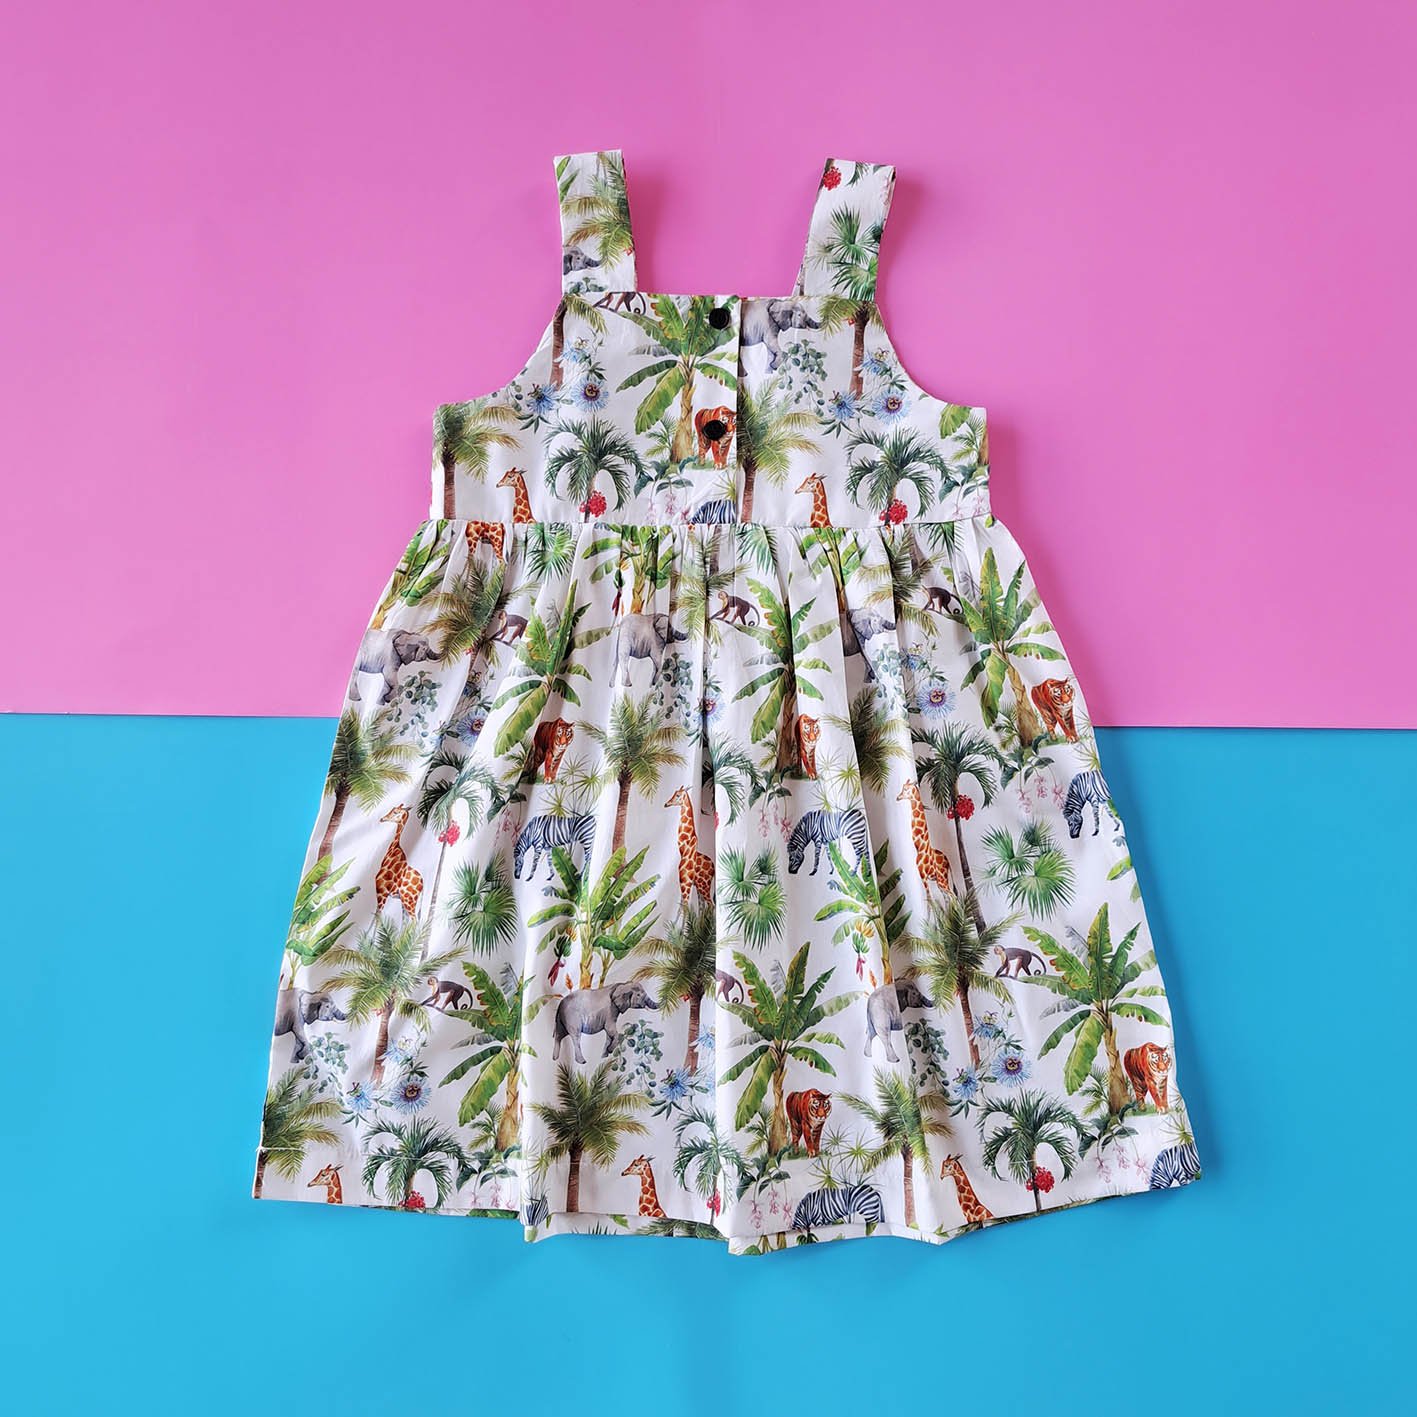 BUTTONS FRONT WHITE SAFARI DRESS 100% PRINTED COTTON*PRE-ORDER SHIP OUT 3 MARCH